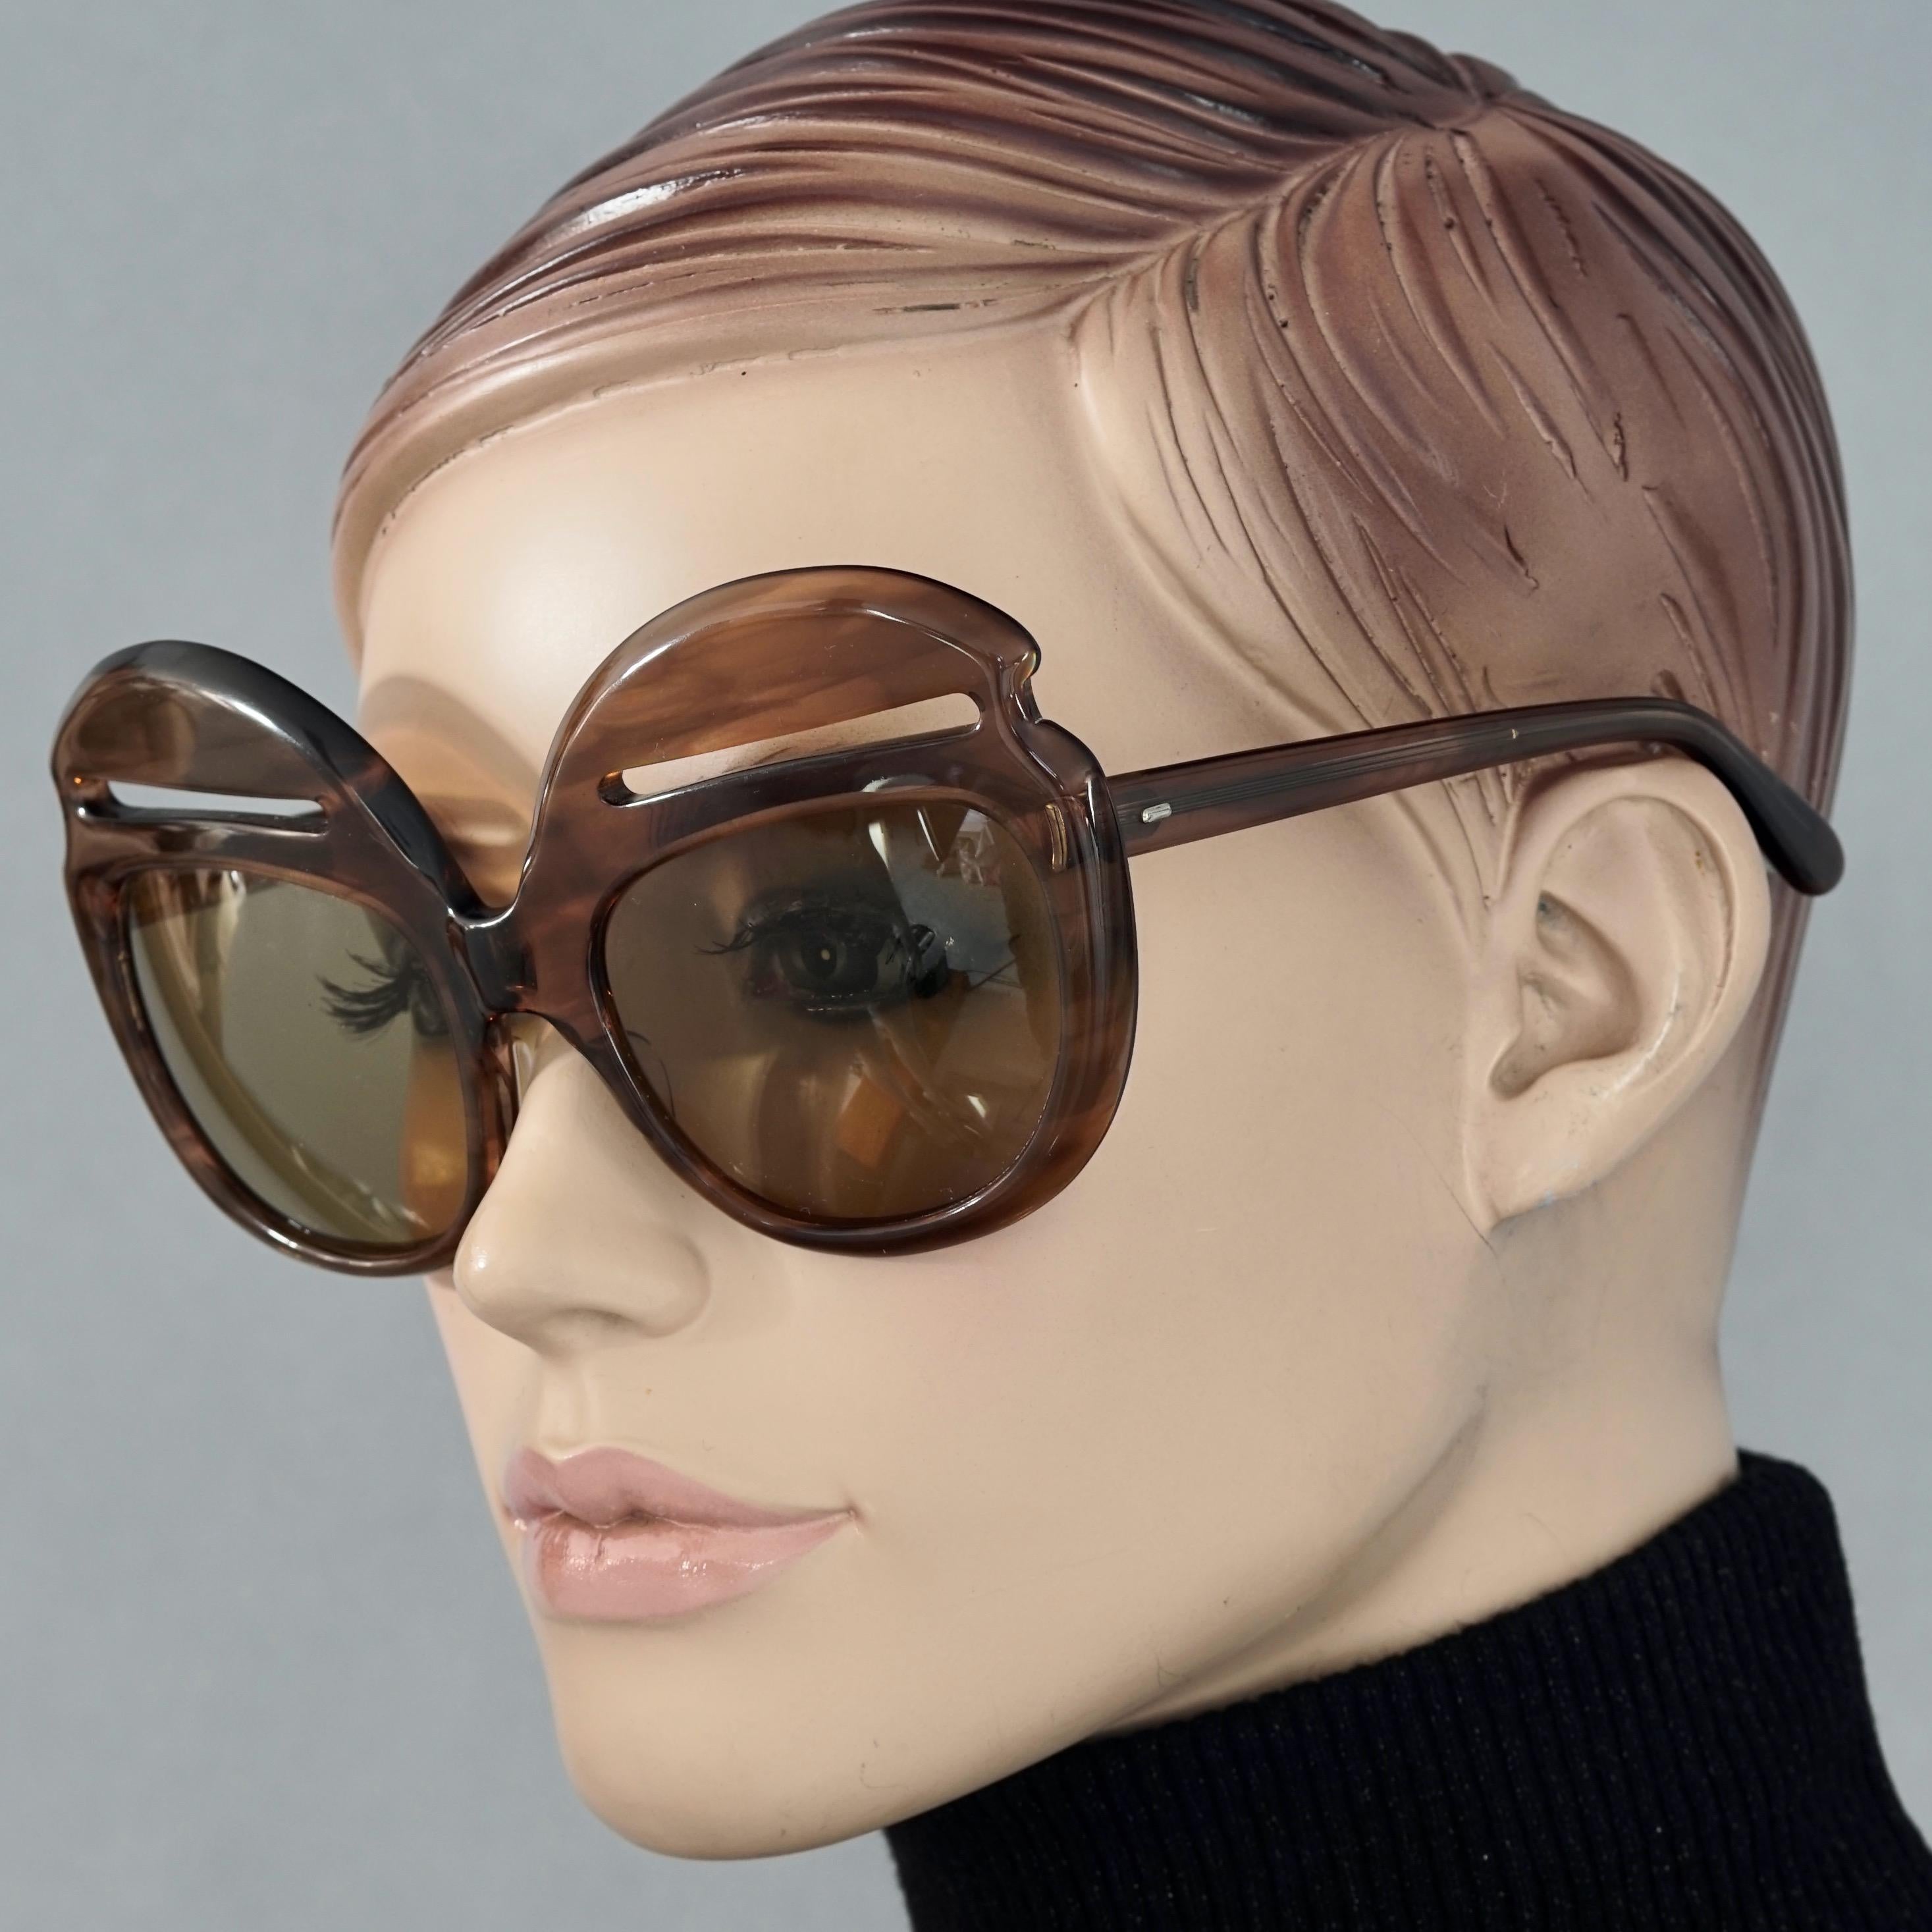 Vintage 1960s PIERRE CARDIN Iconic Oversized Eyebrow Sunglasses

Measurements:
Frame Height: 3.07 inches (7.8 cm)
Frame Width: 5.90 inches (15 cm)
Arms: 5.11 inches (13 cm)

Features:
- 100% Authentic PIERRE CARDIN. 
- Brown oversized sunglasses